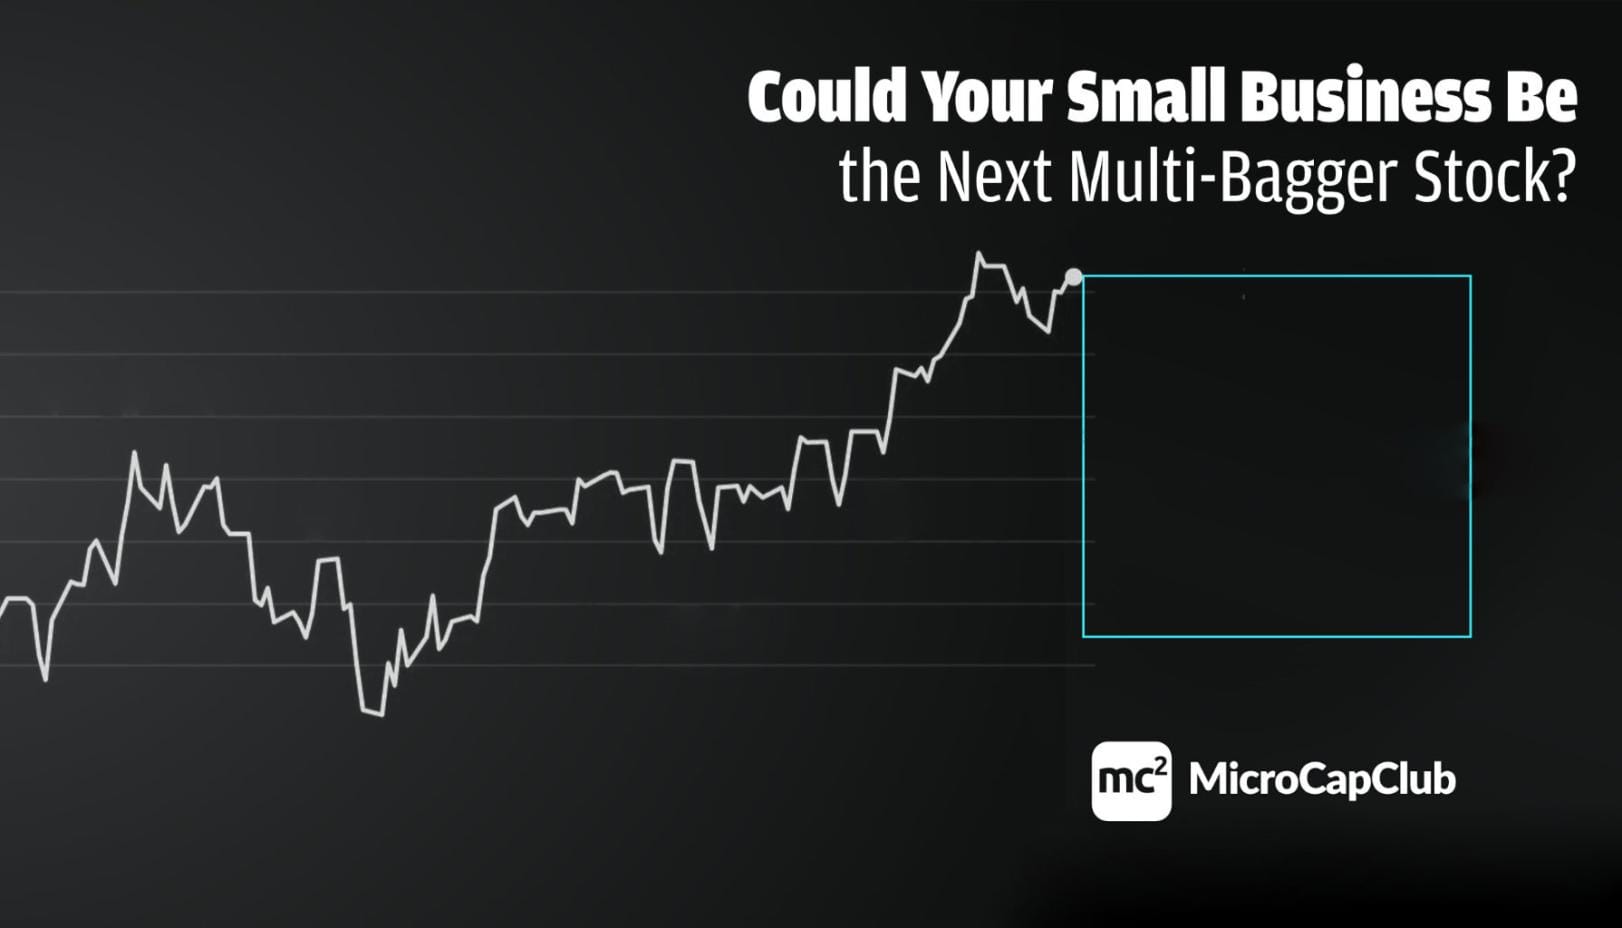 Could Your Small Business be the Next Multi-Bagger Stock?